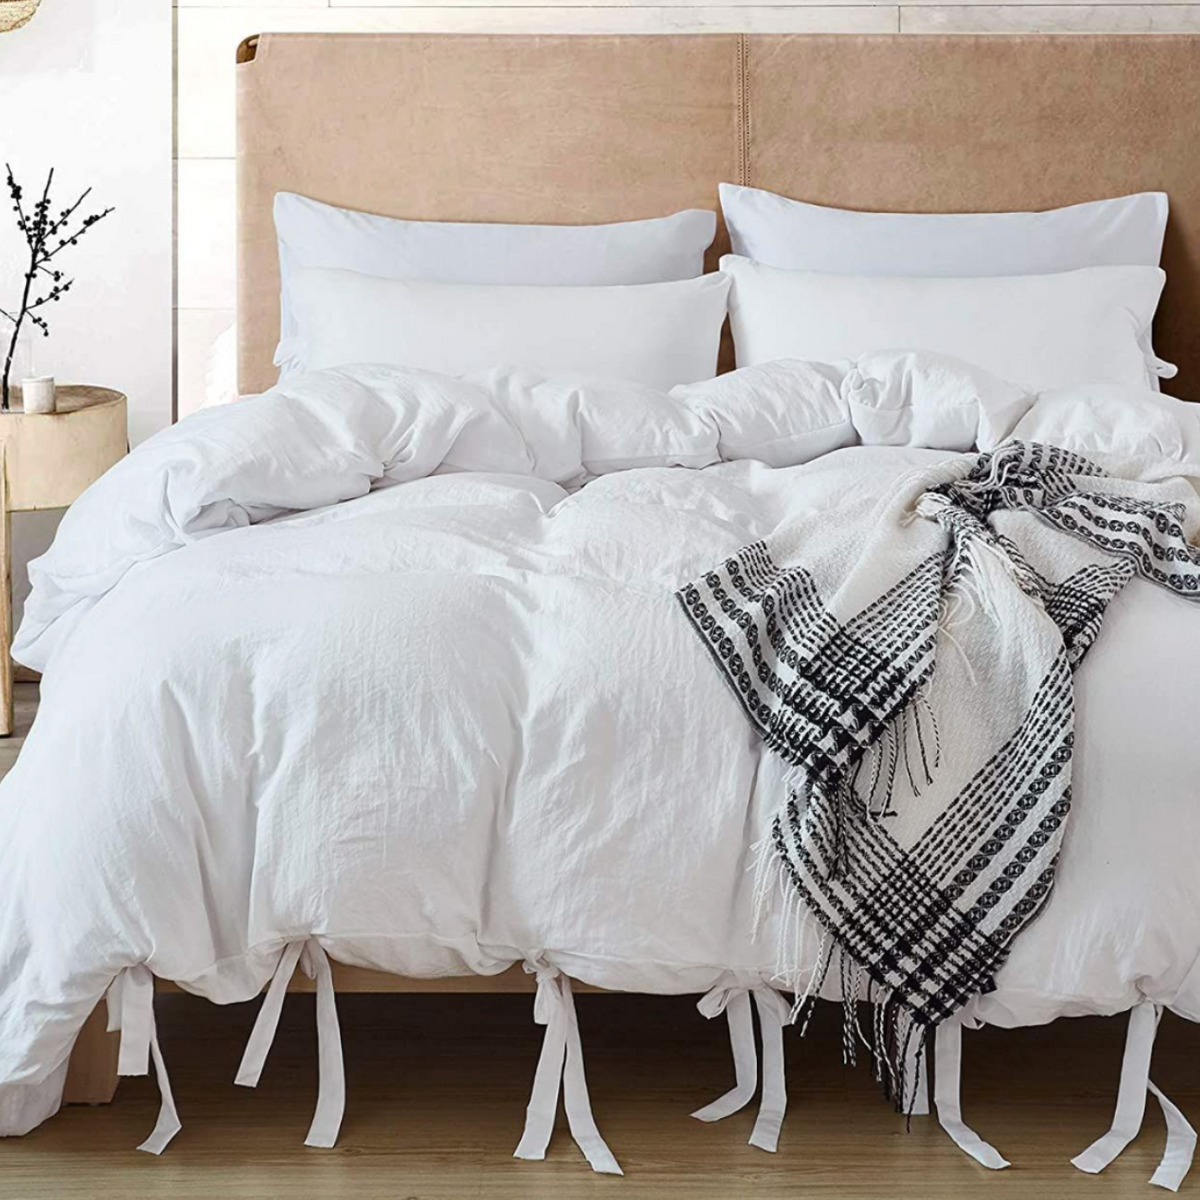 20 Best Duvet Covers 2022 The Strategist, How To Put On A Duvet With Ties